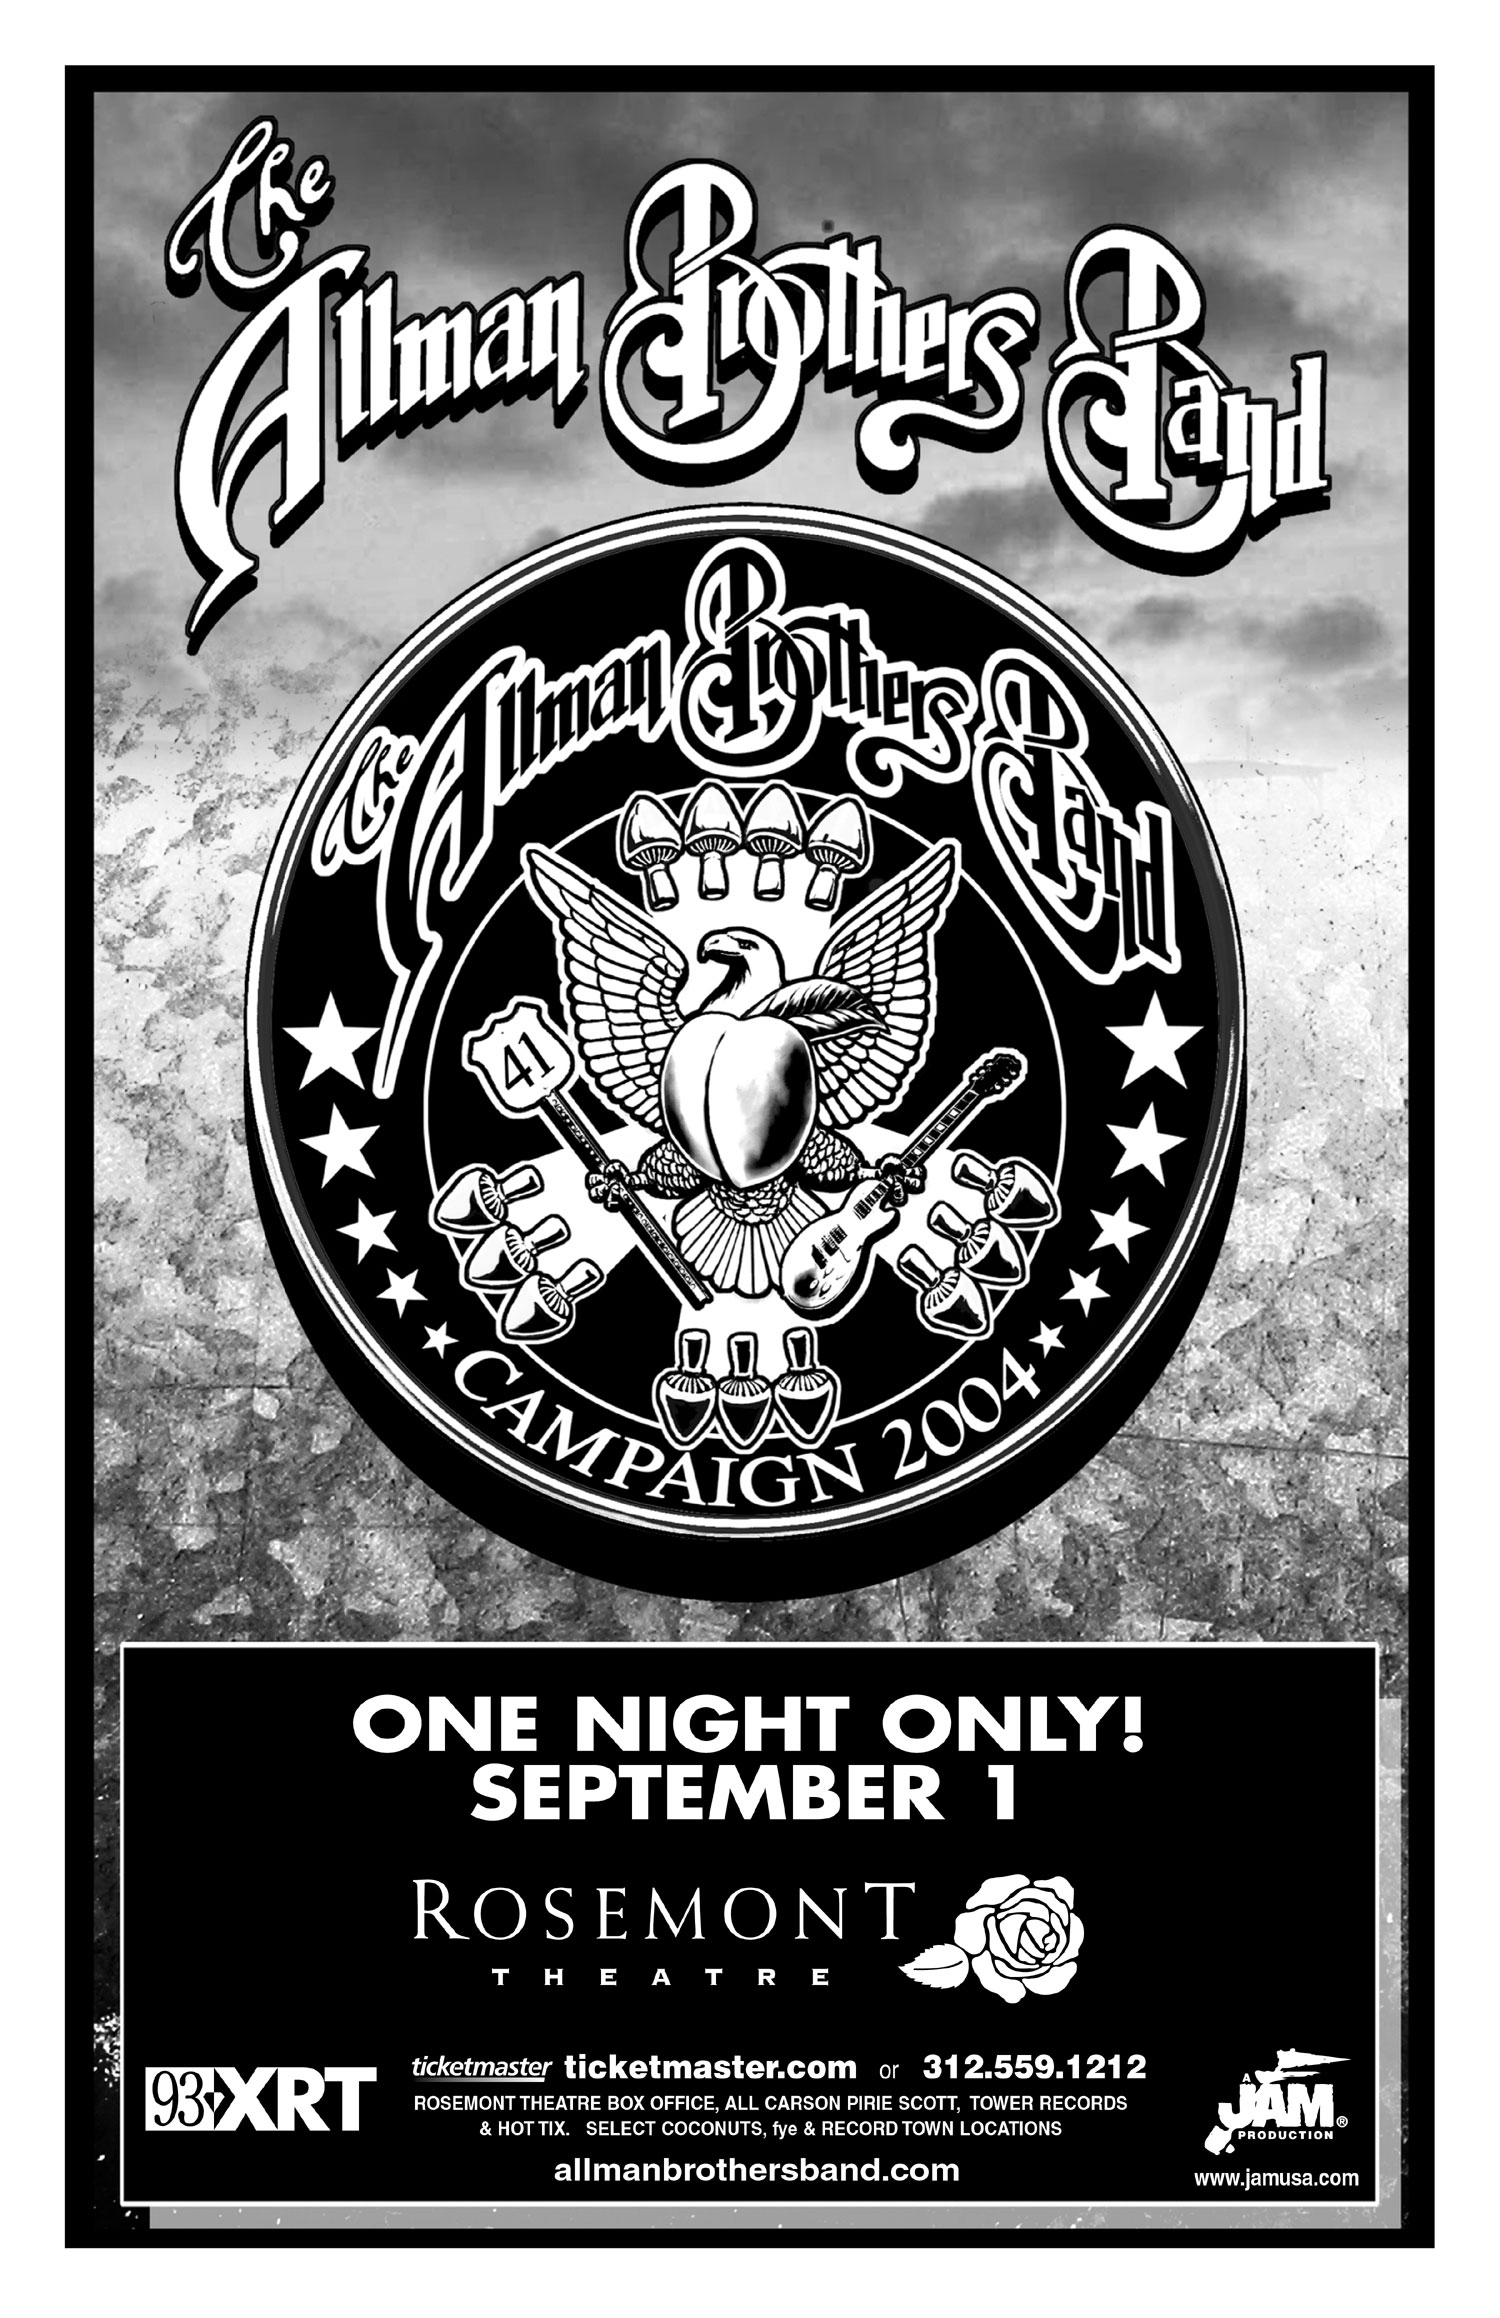 Print ad for the ABB's September 1, 2004 show in Rosemont, IL.